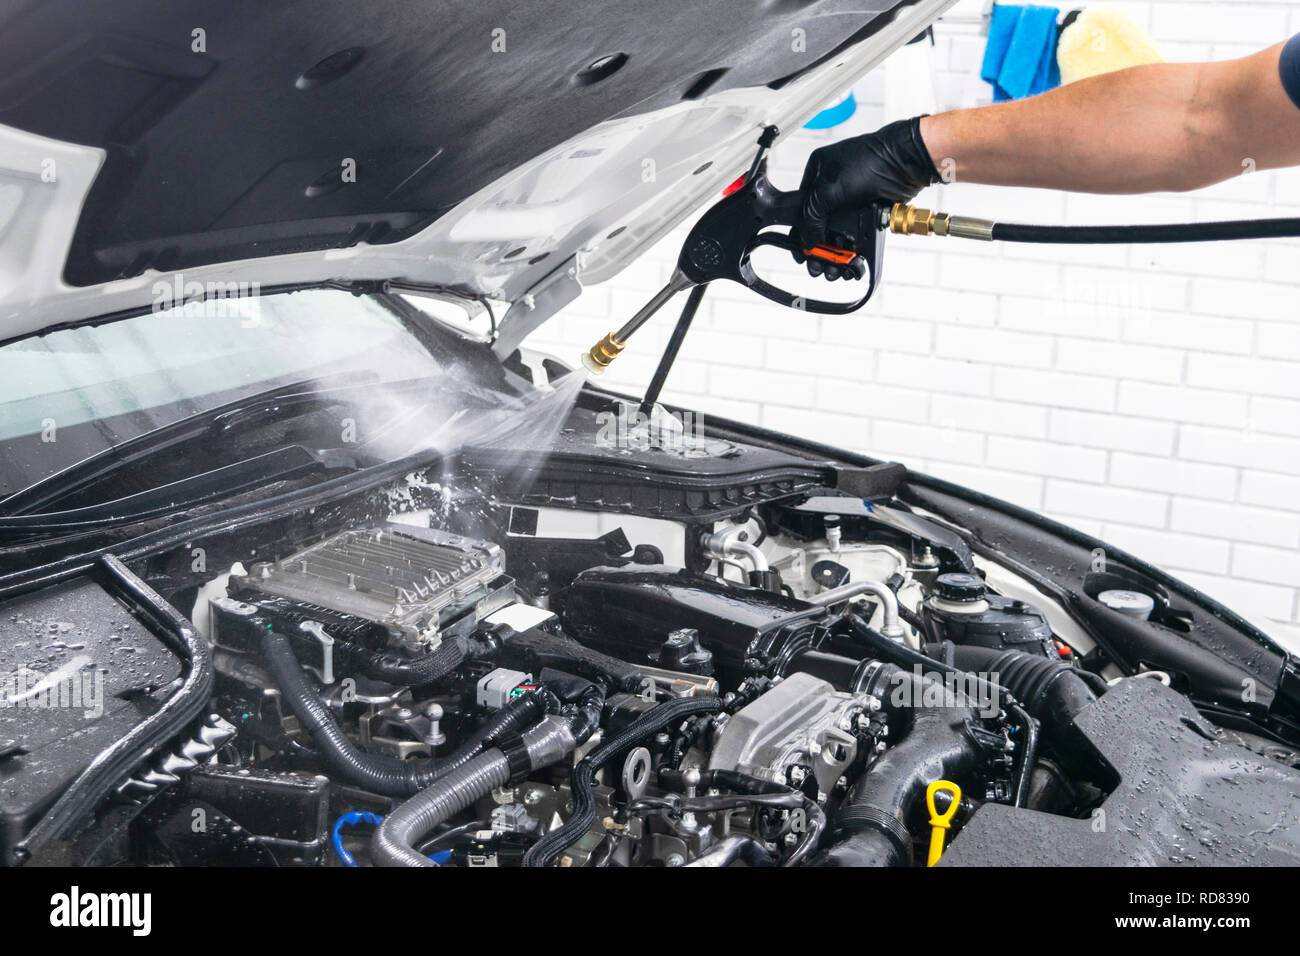 Car detailing. Manual car wash engine with pressure water. Washing car engine with water nozzle. Car washman worker cleaning vehicle engine. Man spray Stock Photo